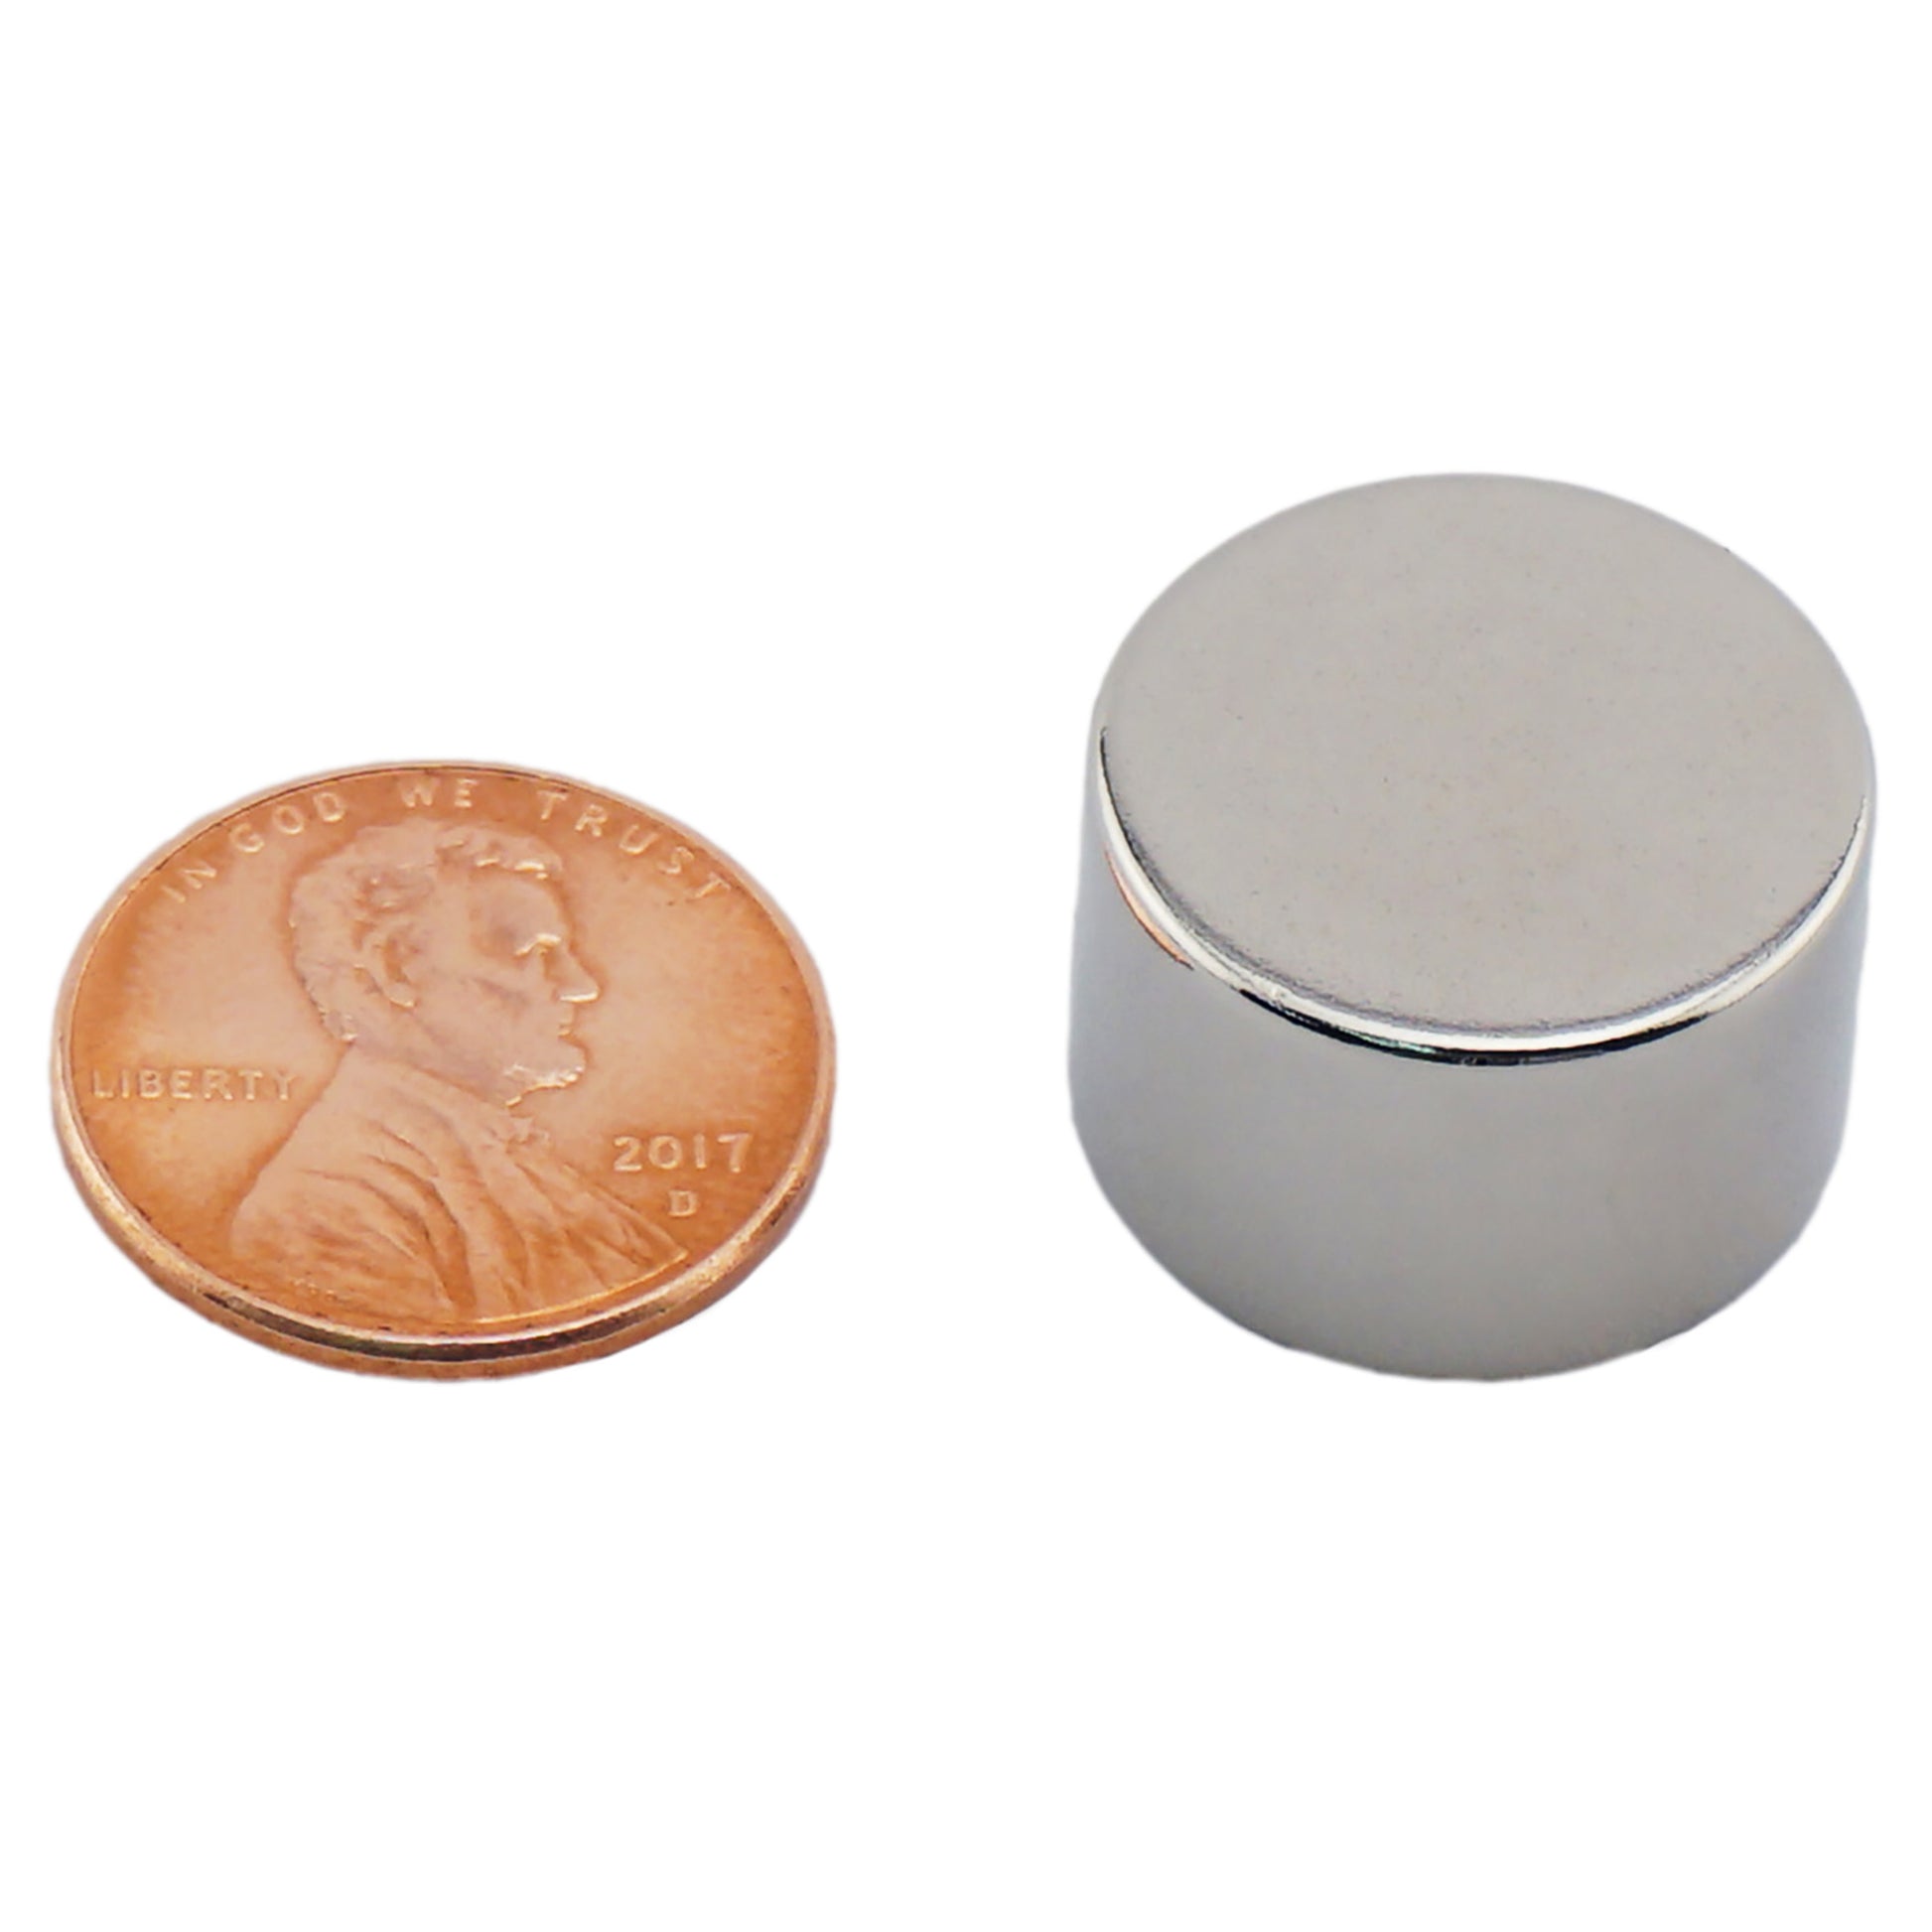 Load image into Gallery viewer, ND007527N Neodymium Disc Magnet - Compared to Penny for Size Reference